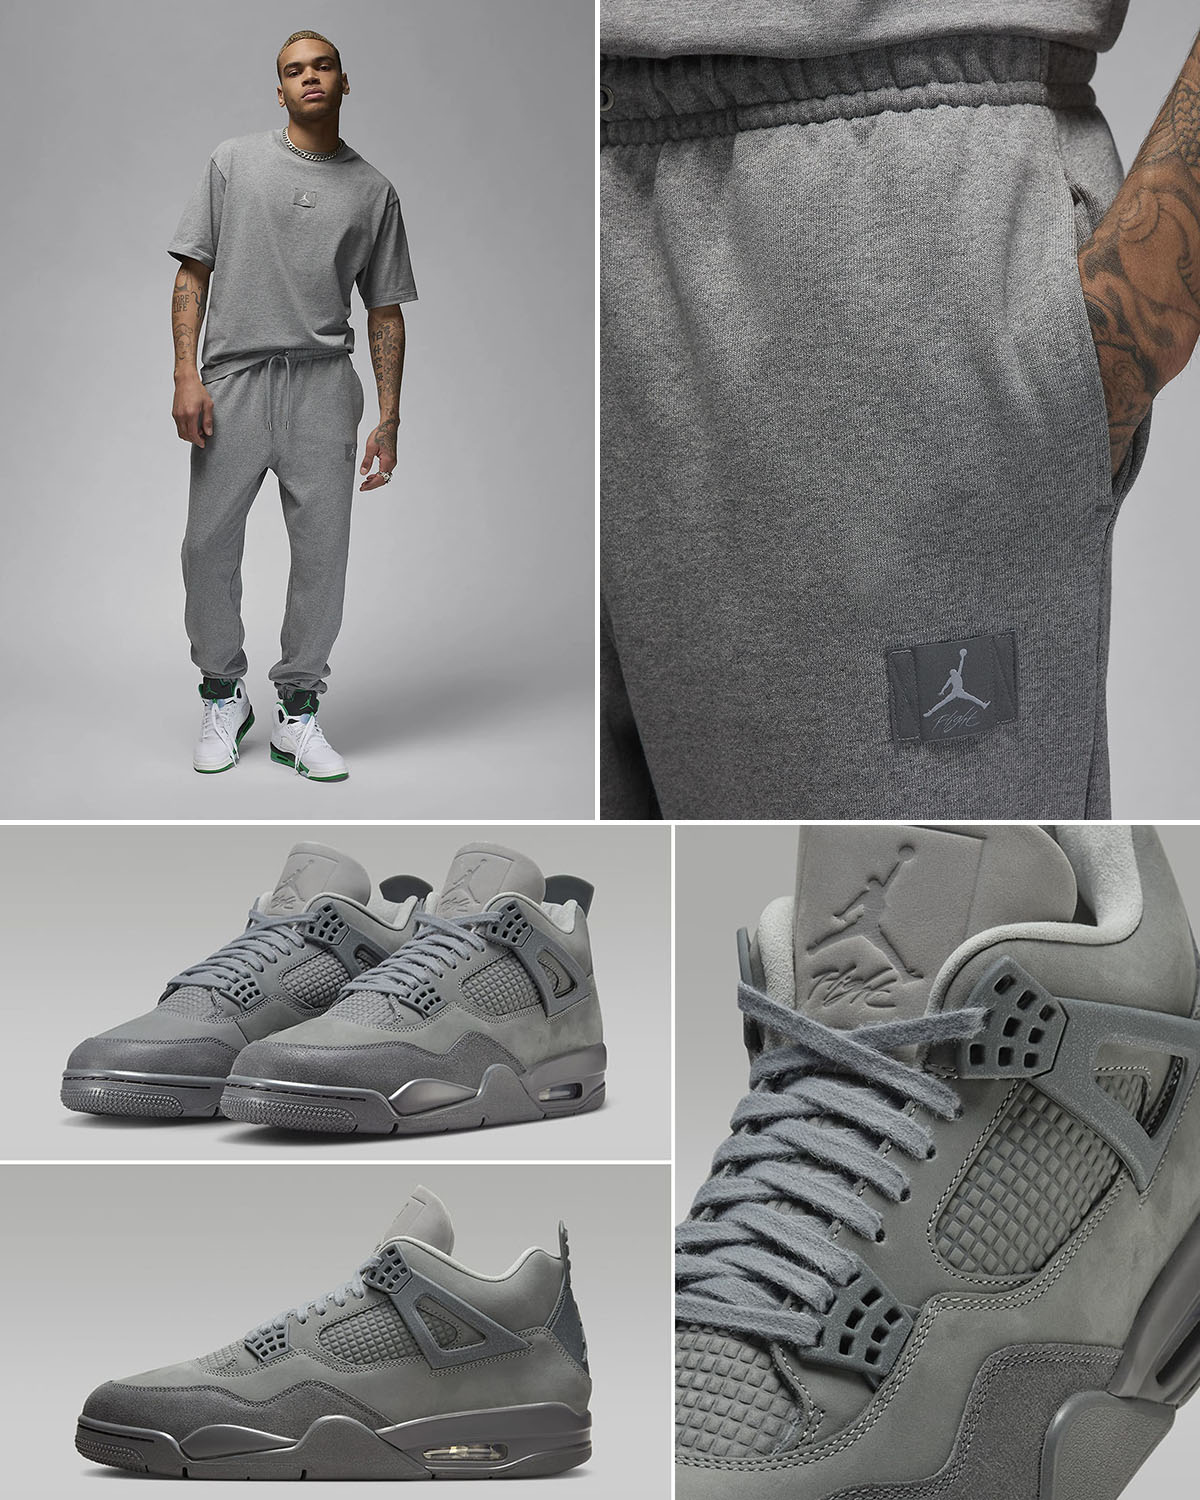 Creates a Luxury Union LA x Air university jordan and You Can Own a Pair for $4 Paris Olympics Pants Matching Outfit